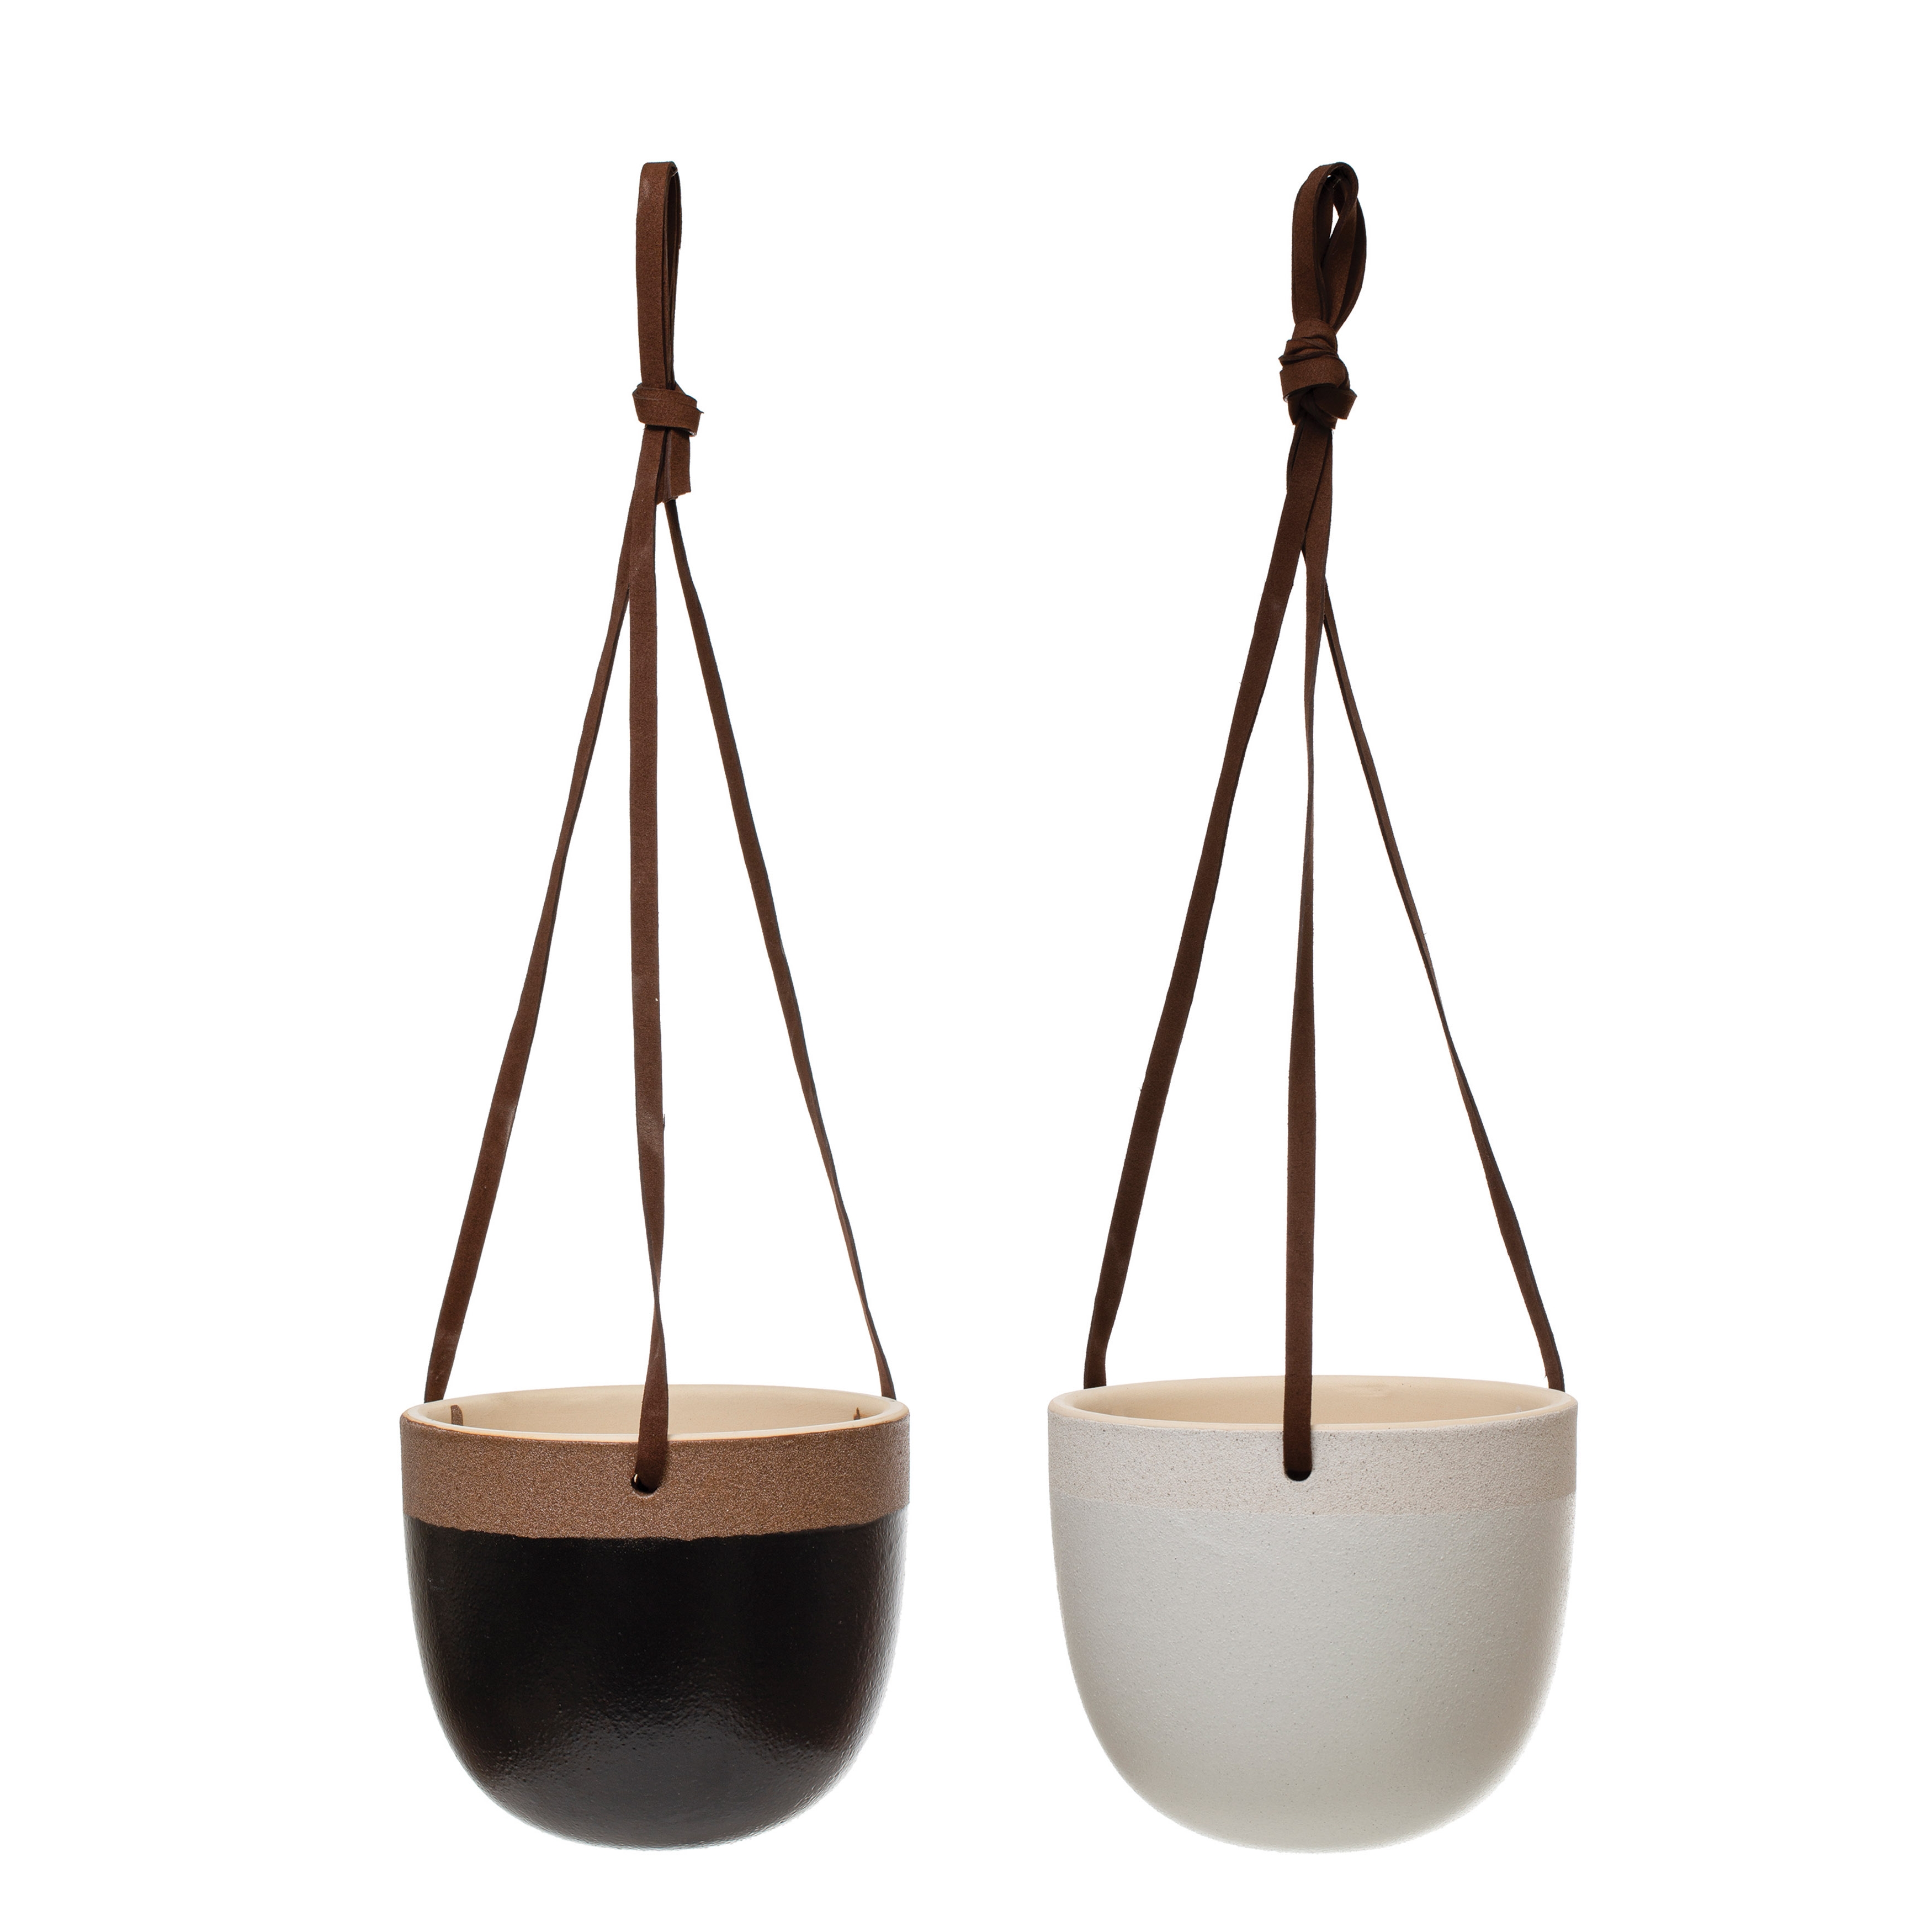 Farmhouse Terracotta Plant Pots with Leather Hanger, Set of 2 - Image 0